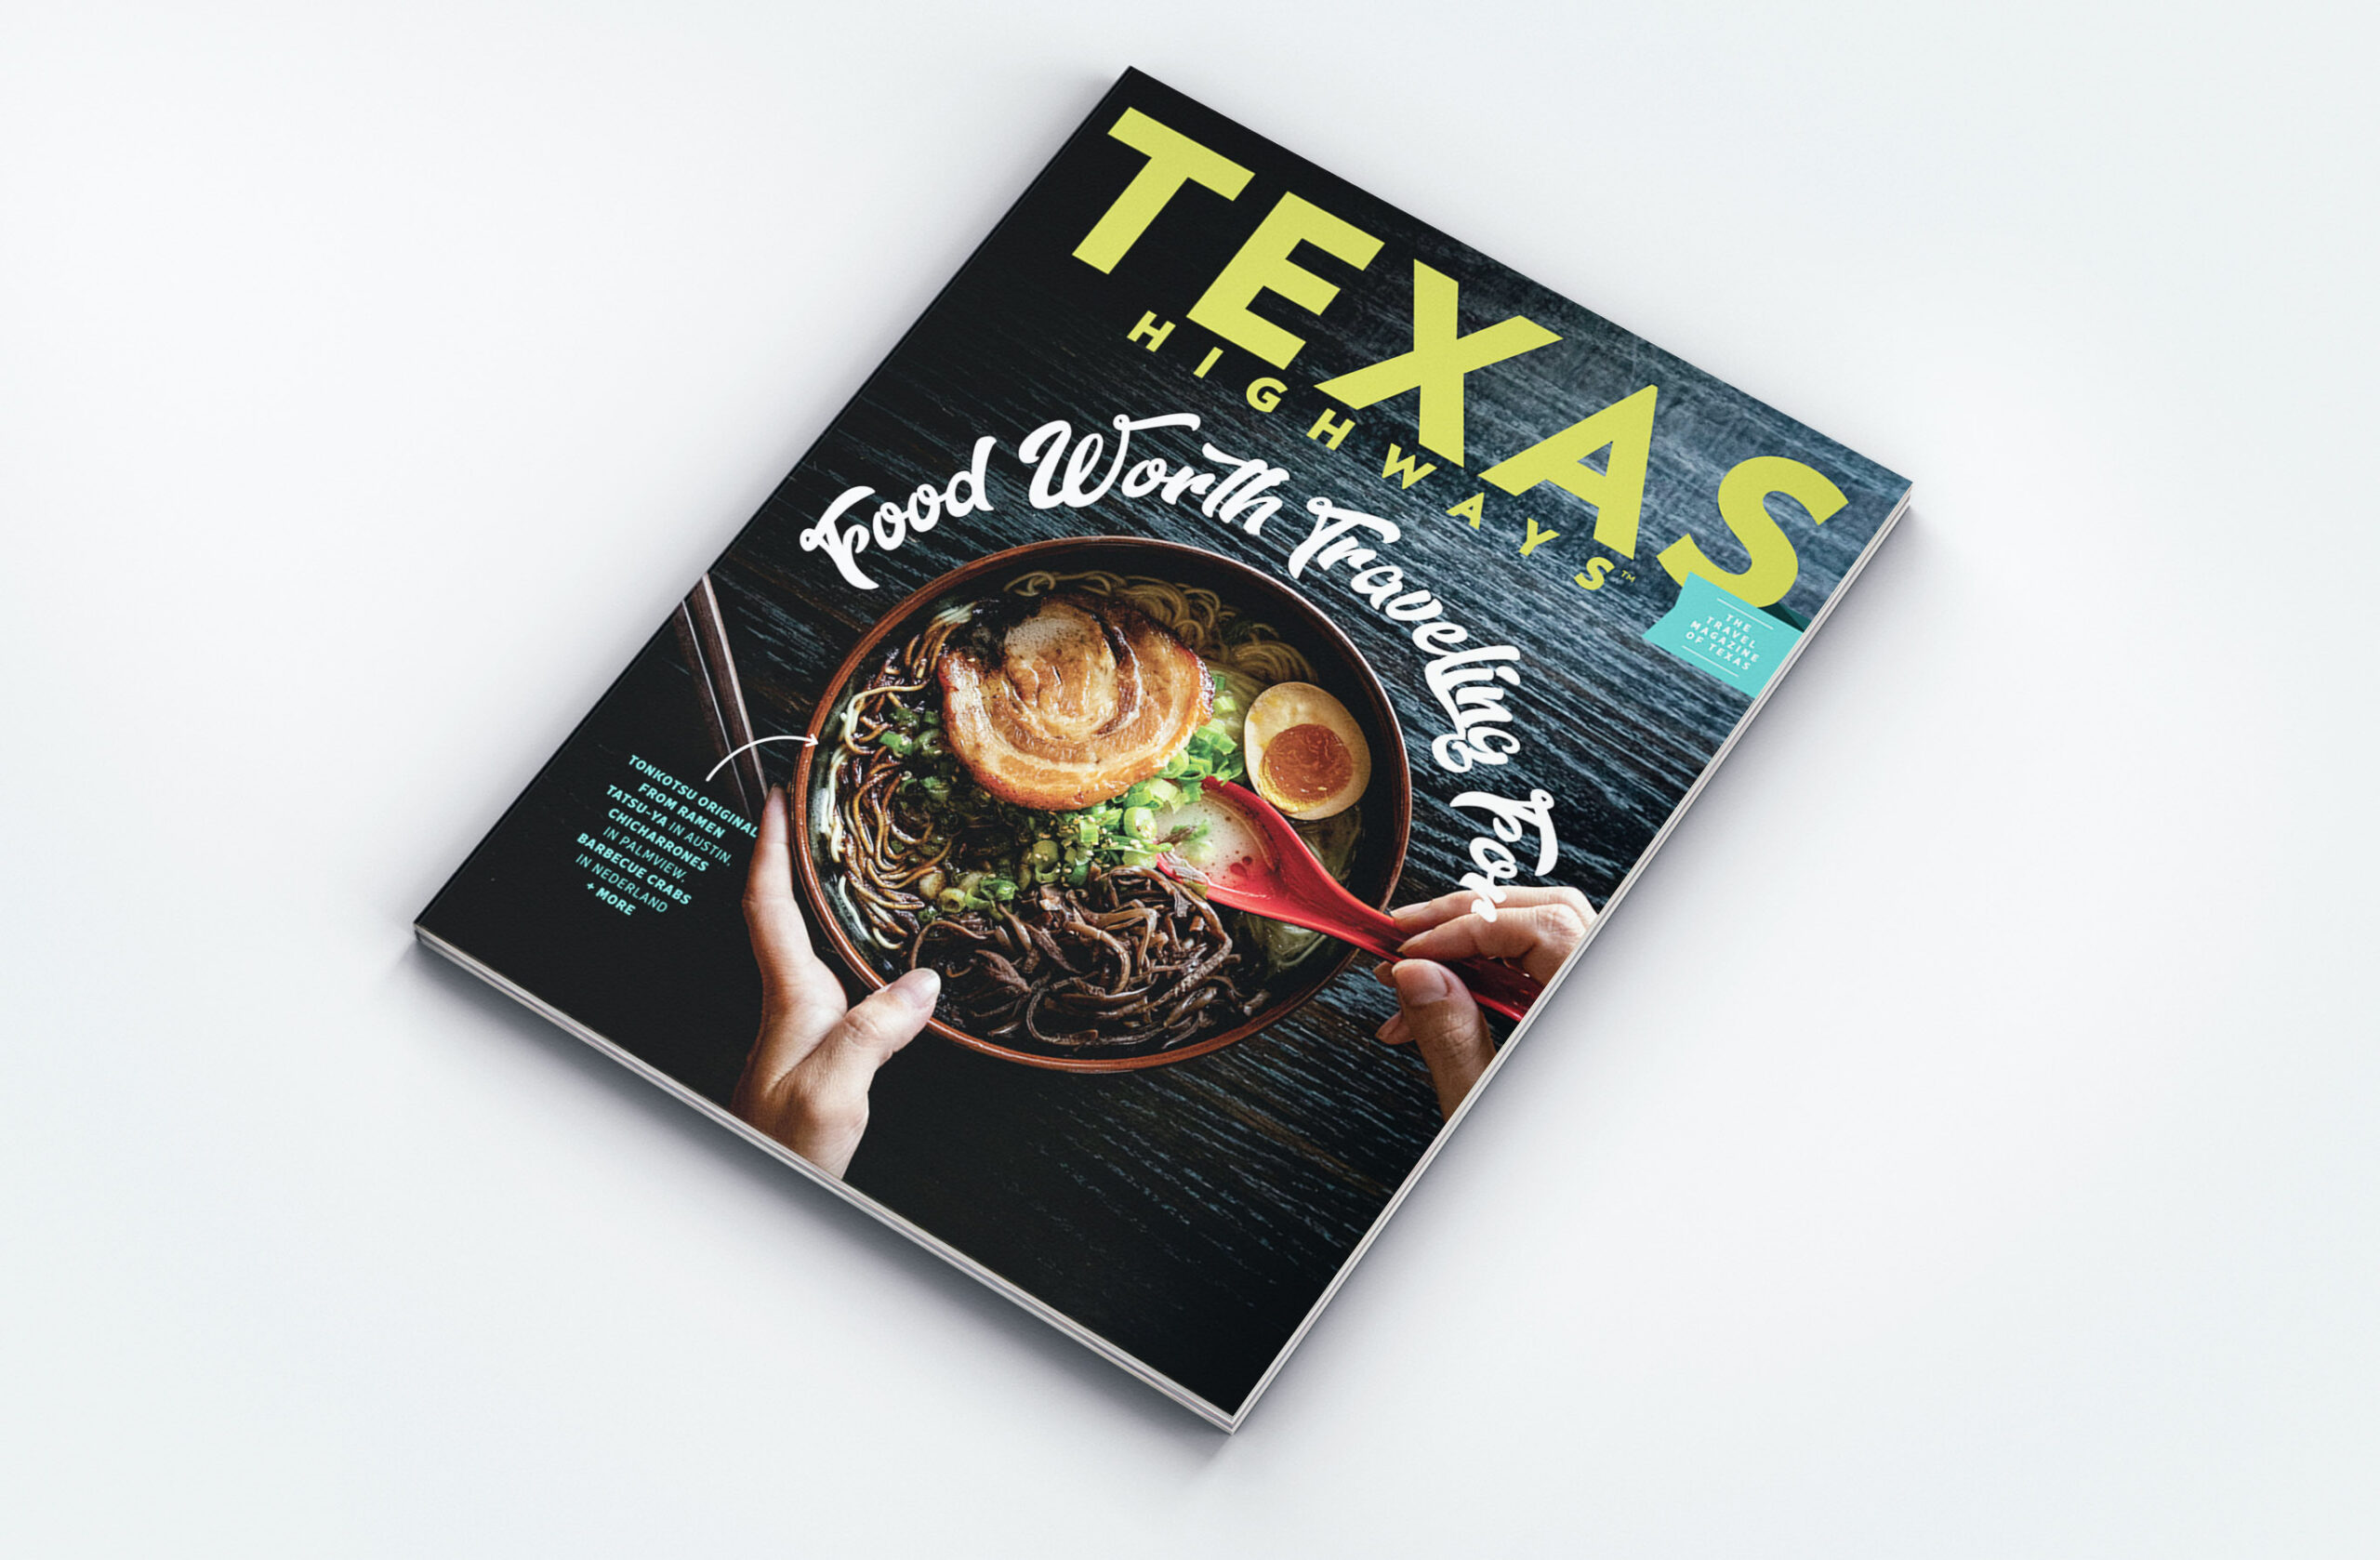 The November 2021 issue of Texas Highways featured a bowl of ramen on the cover from Ramen Tatsu-Ya in Austin